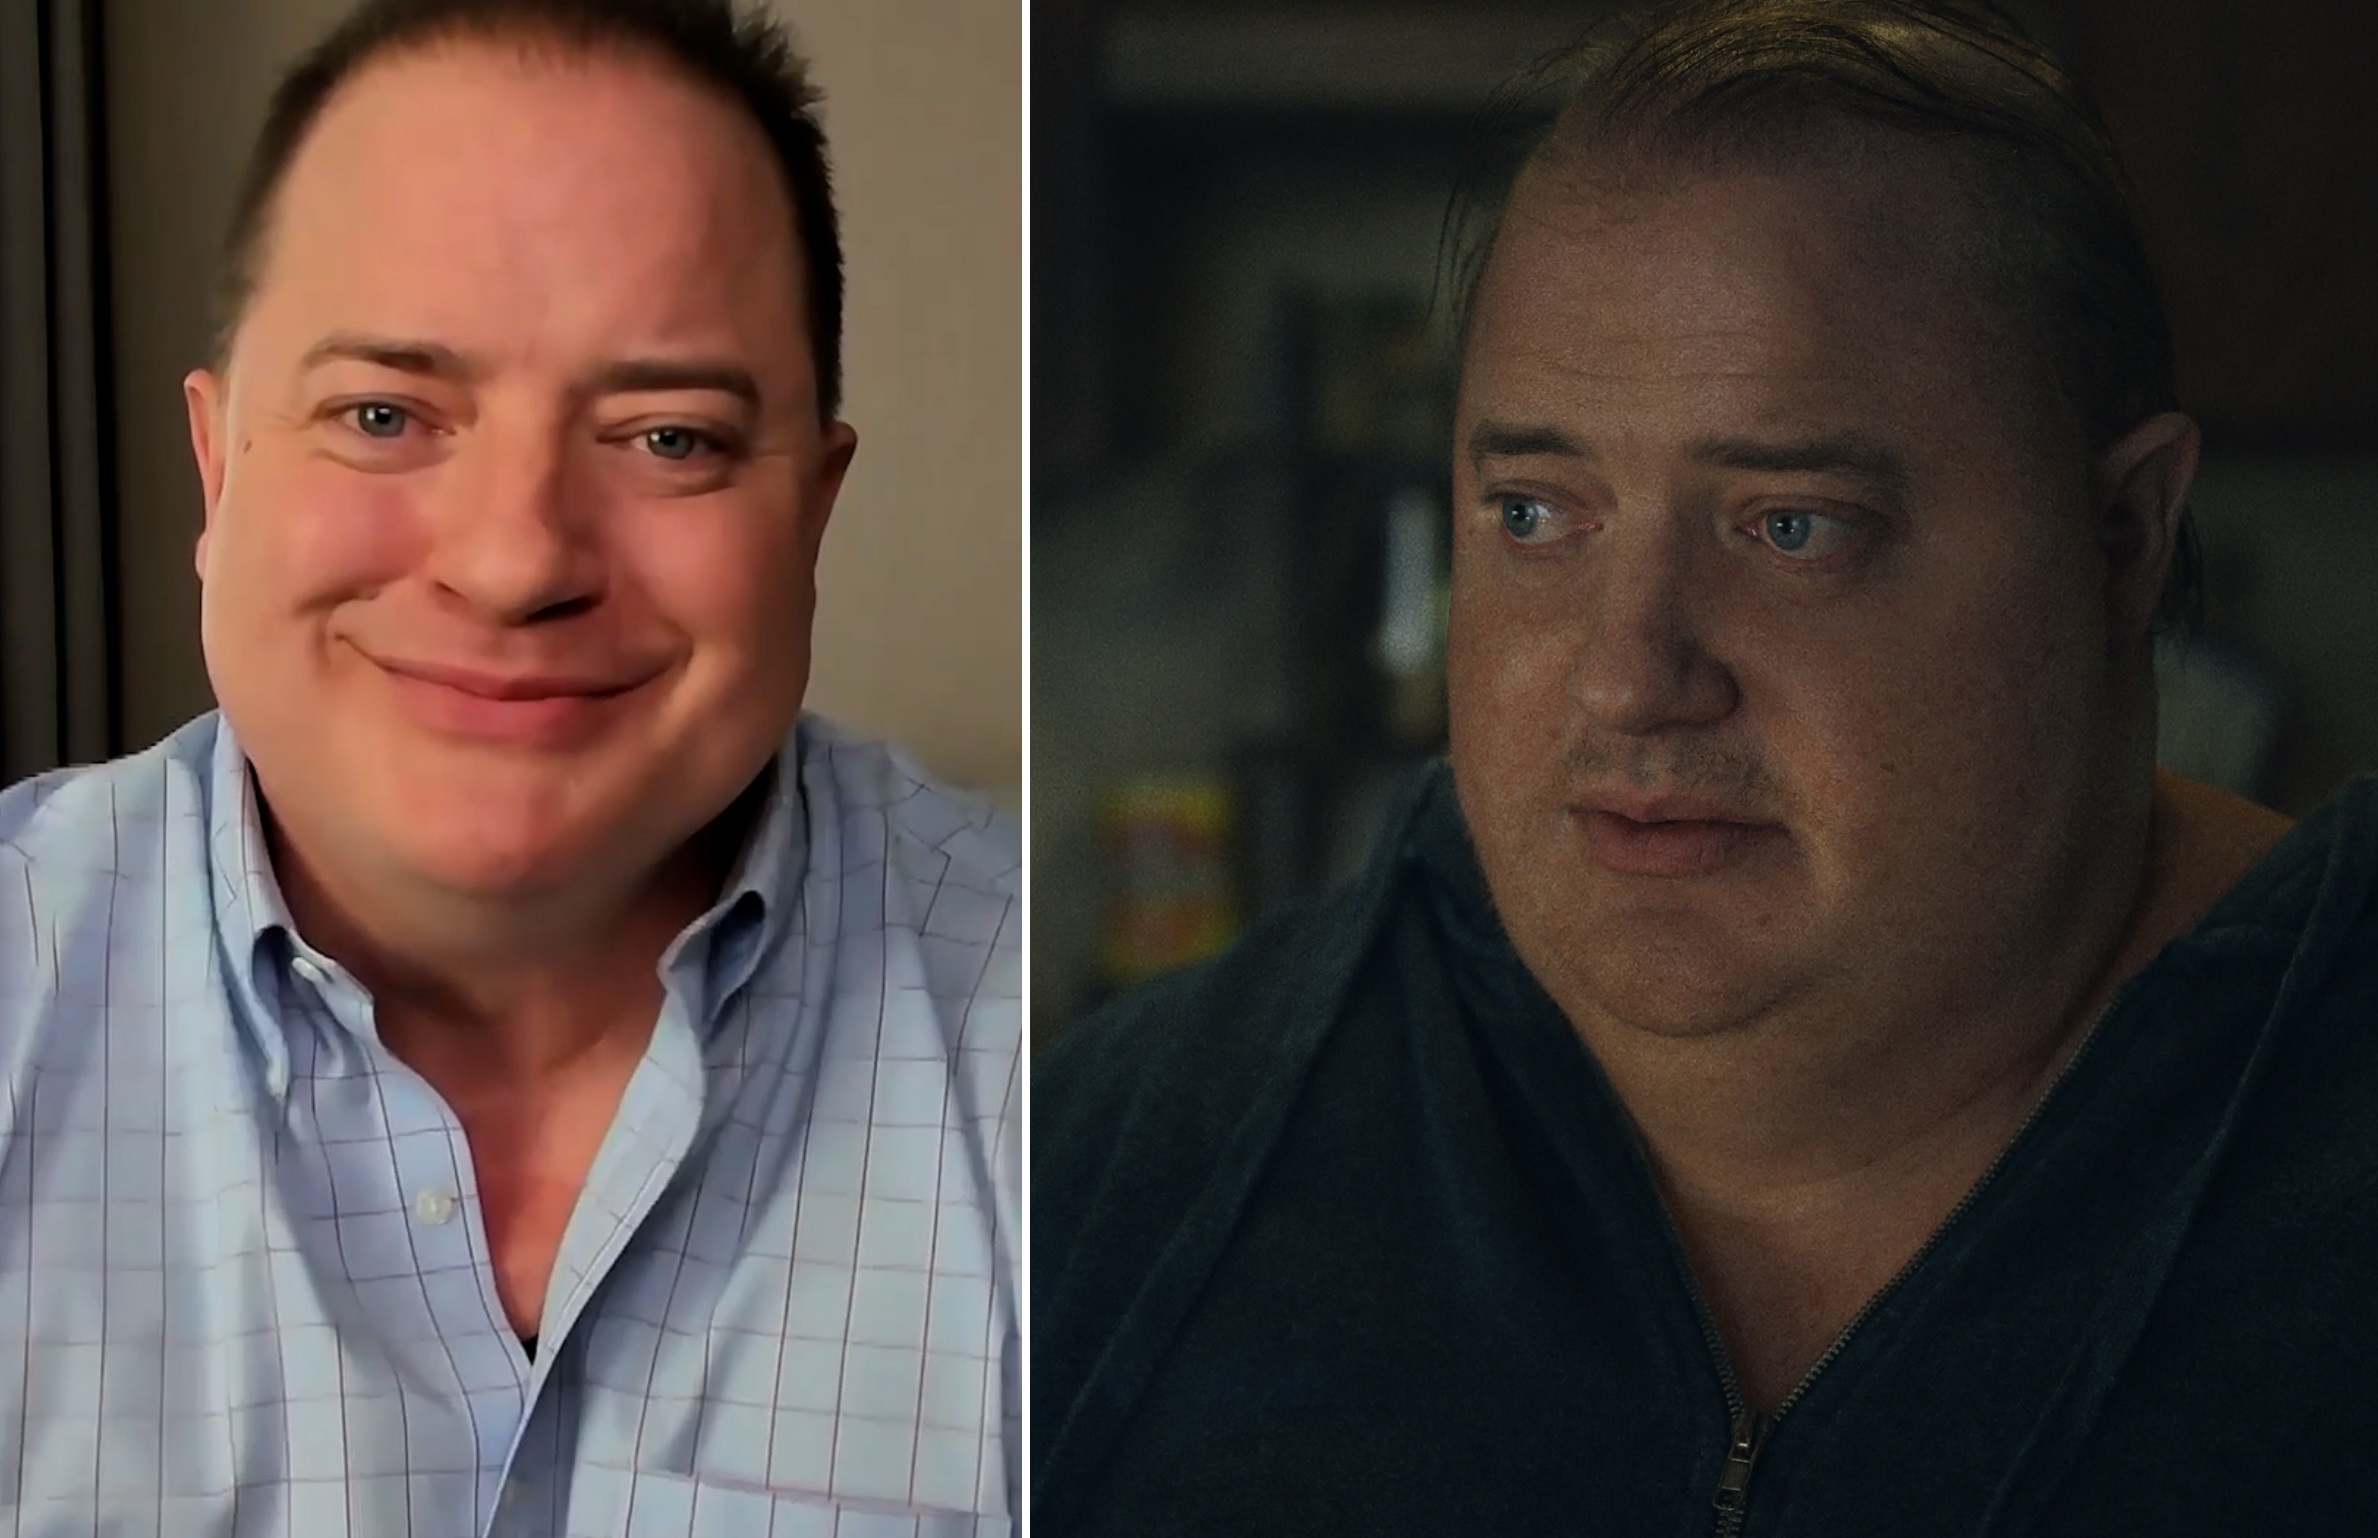 Brendan Fraser in a 'Fat Suit' in 'The Whale' Preview Divides Opinions